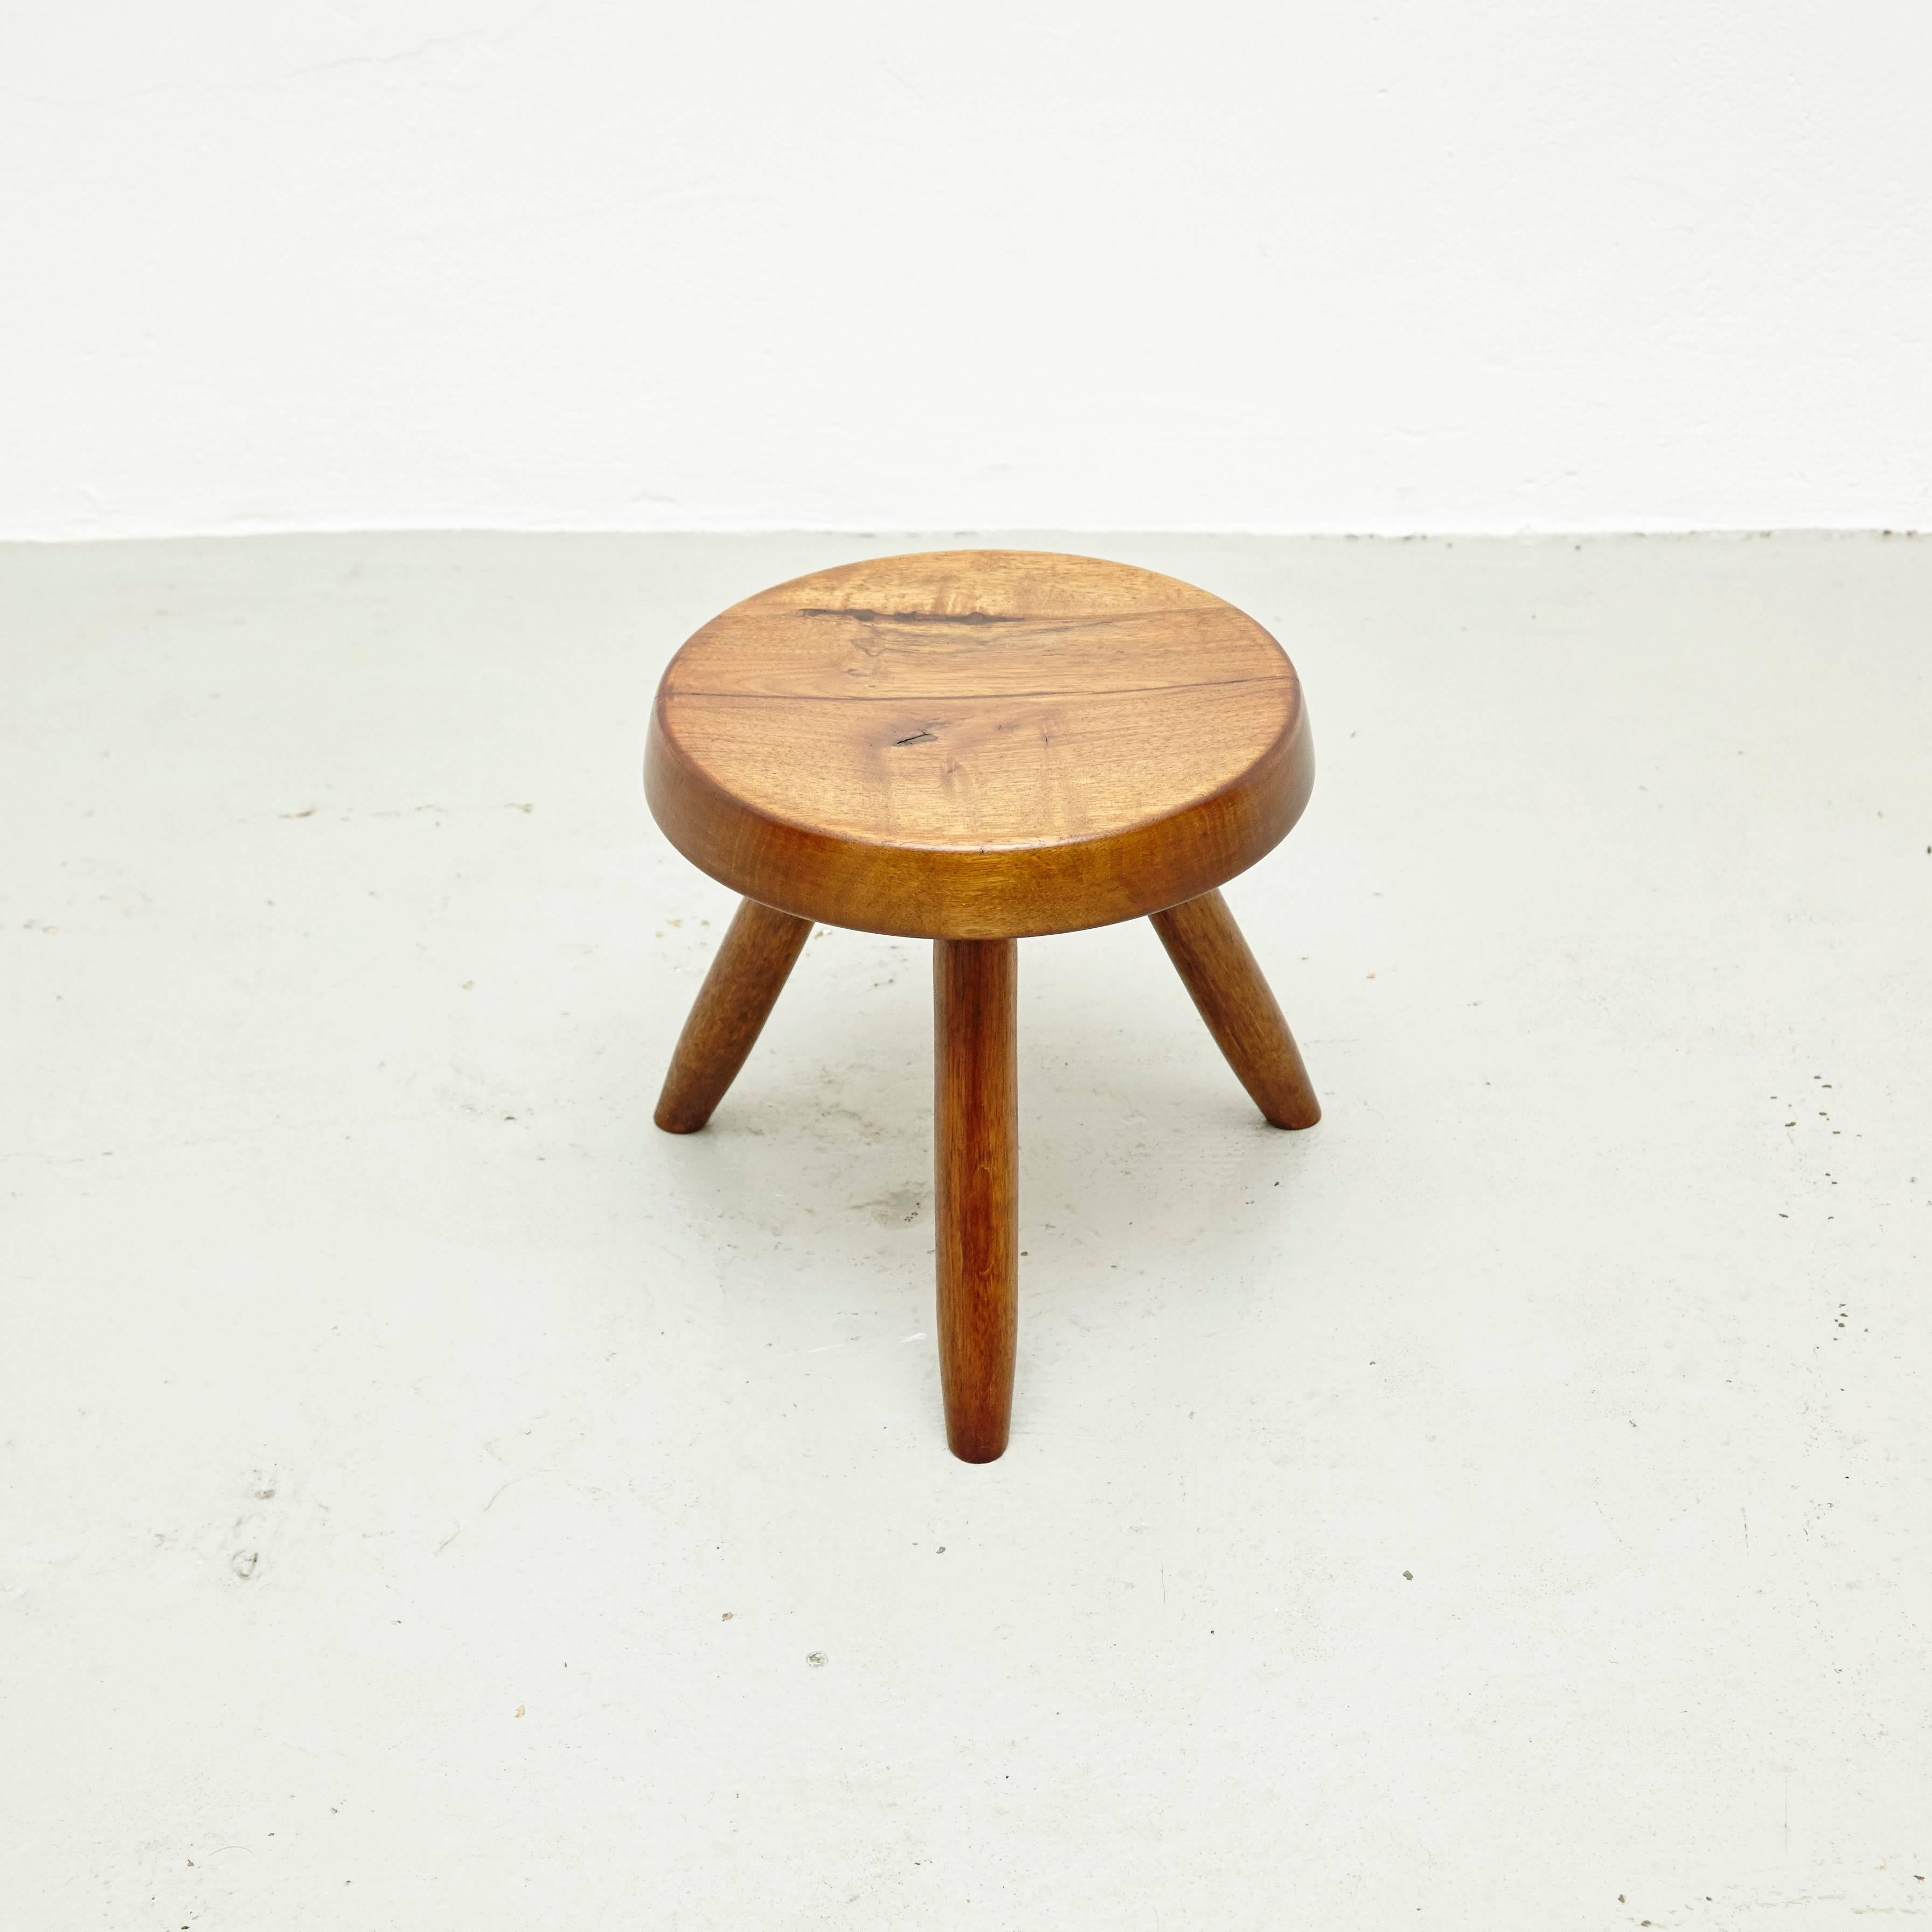 Stool designed in the style of Charlotte Perriand, made by unknown manufacturer.
In good original condition, preserving a beautiful patina, with minor wear consistent with age and use. 

Charlotte Perriand (1903-1999) She was born in Paris in